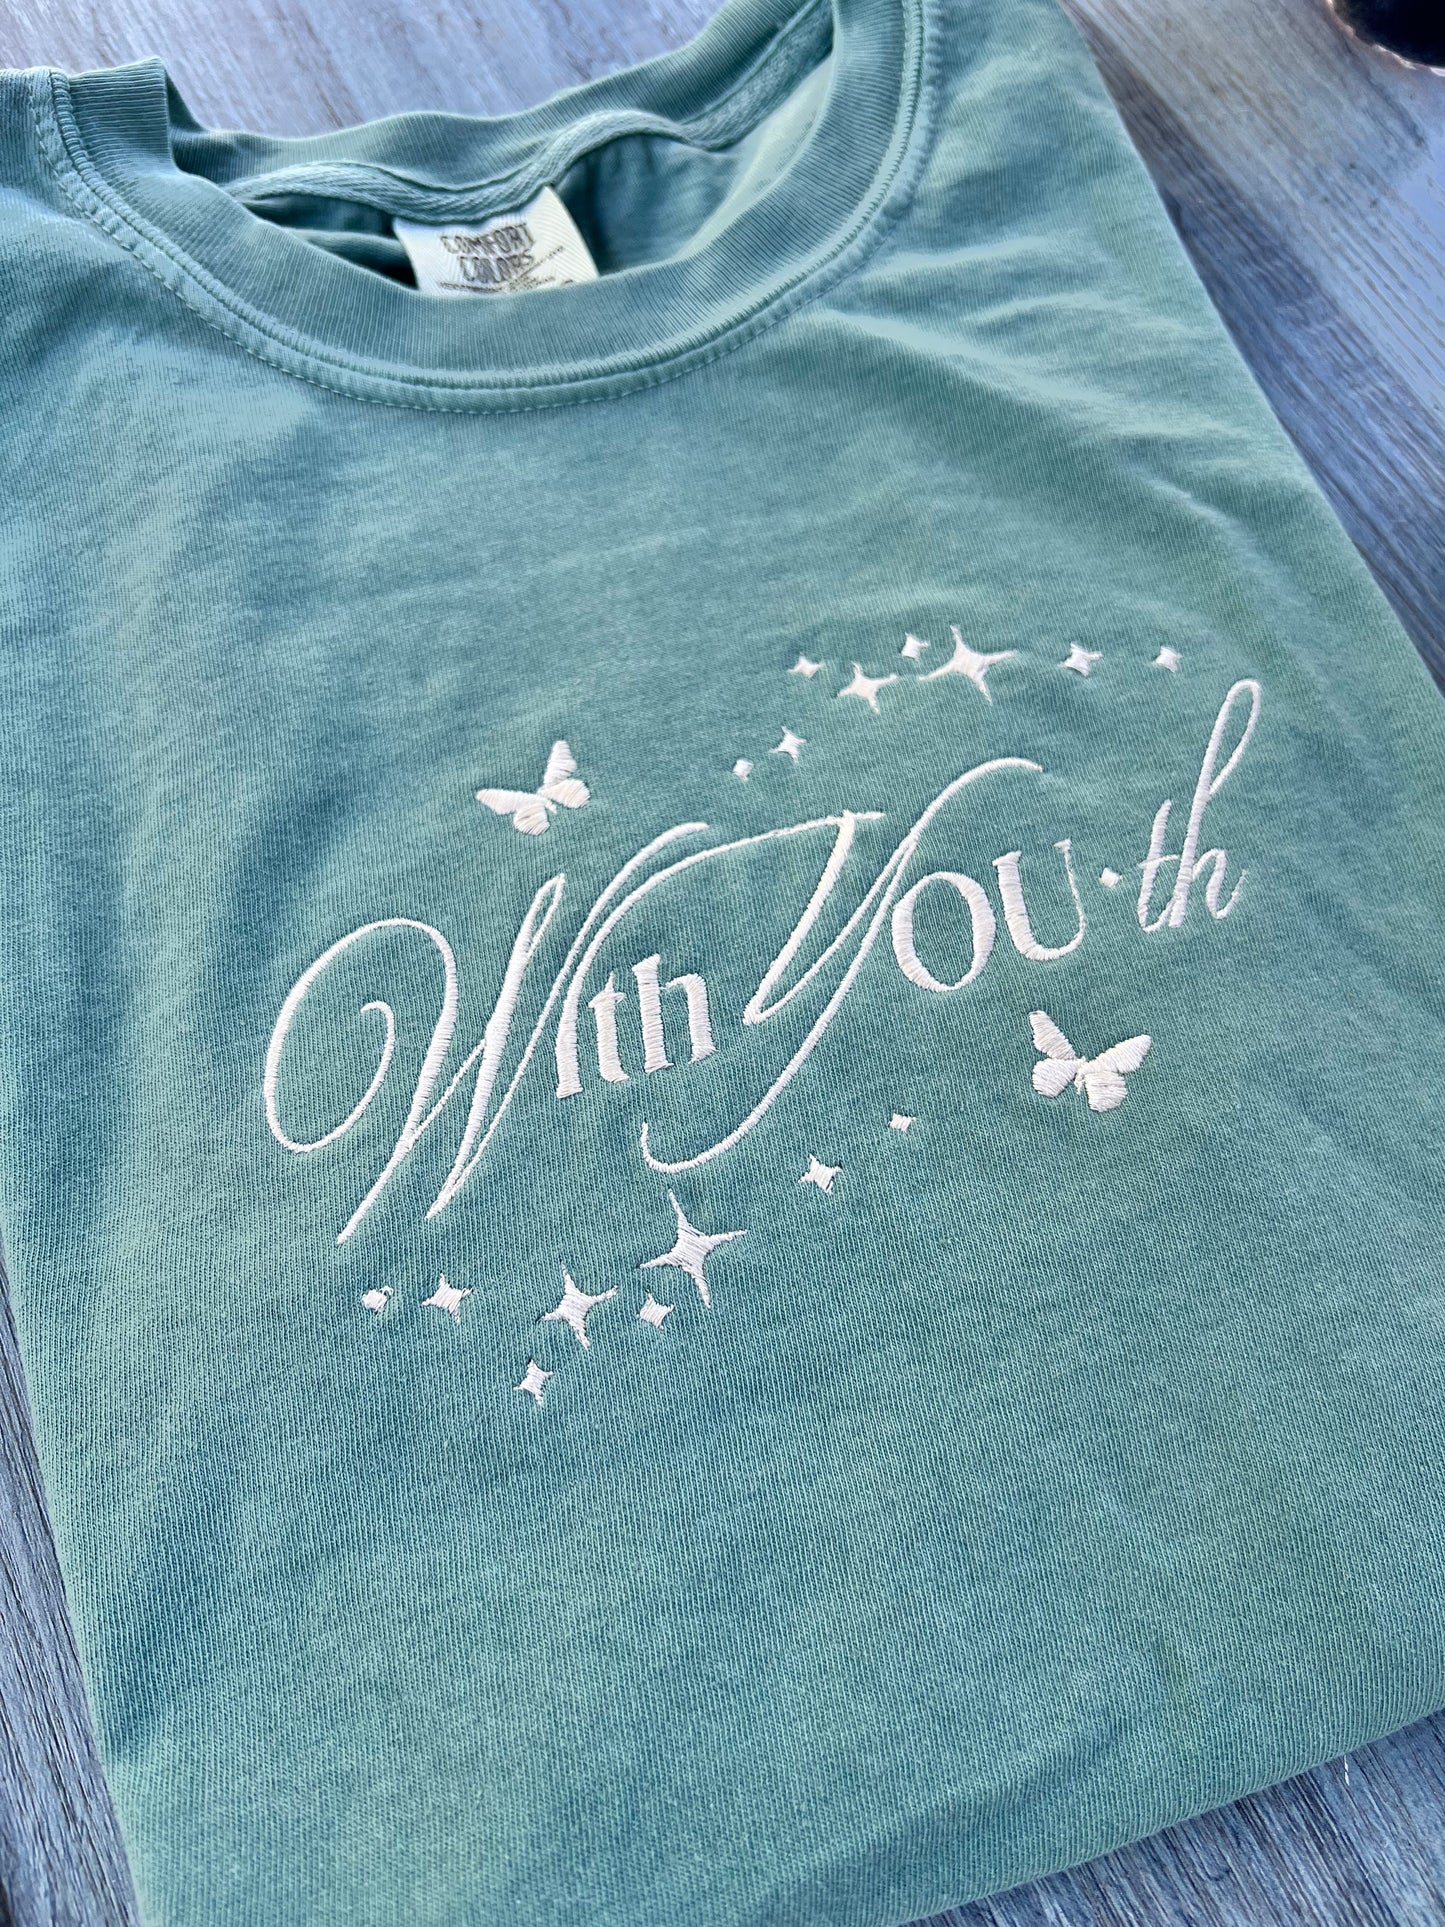 With you-th tees